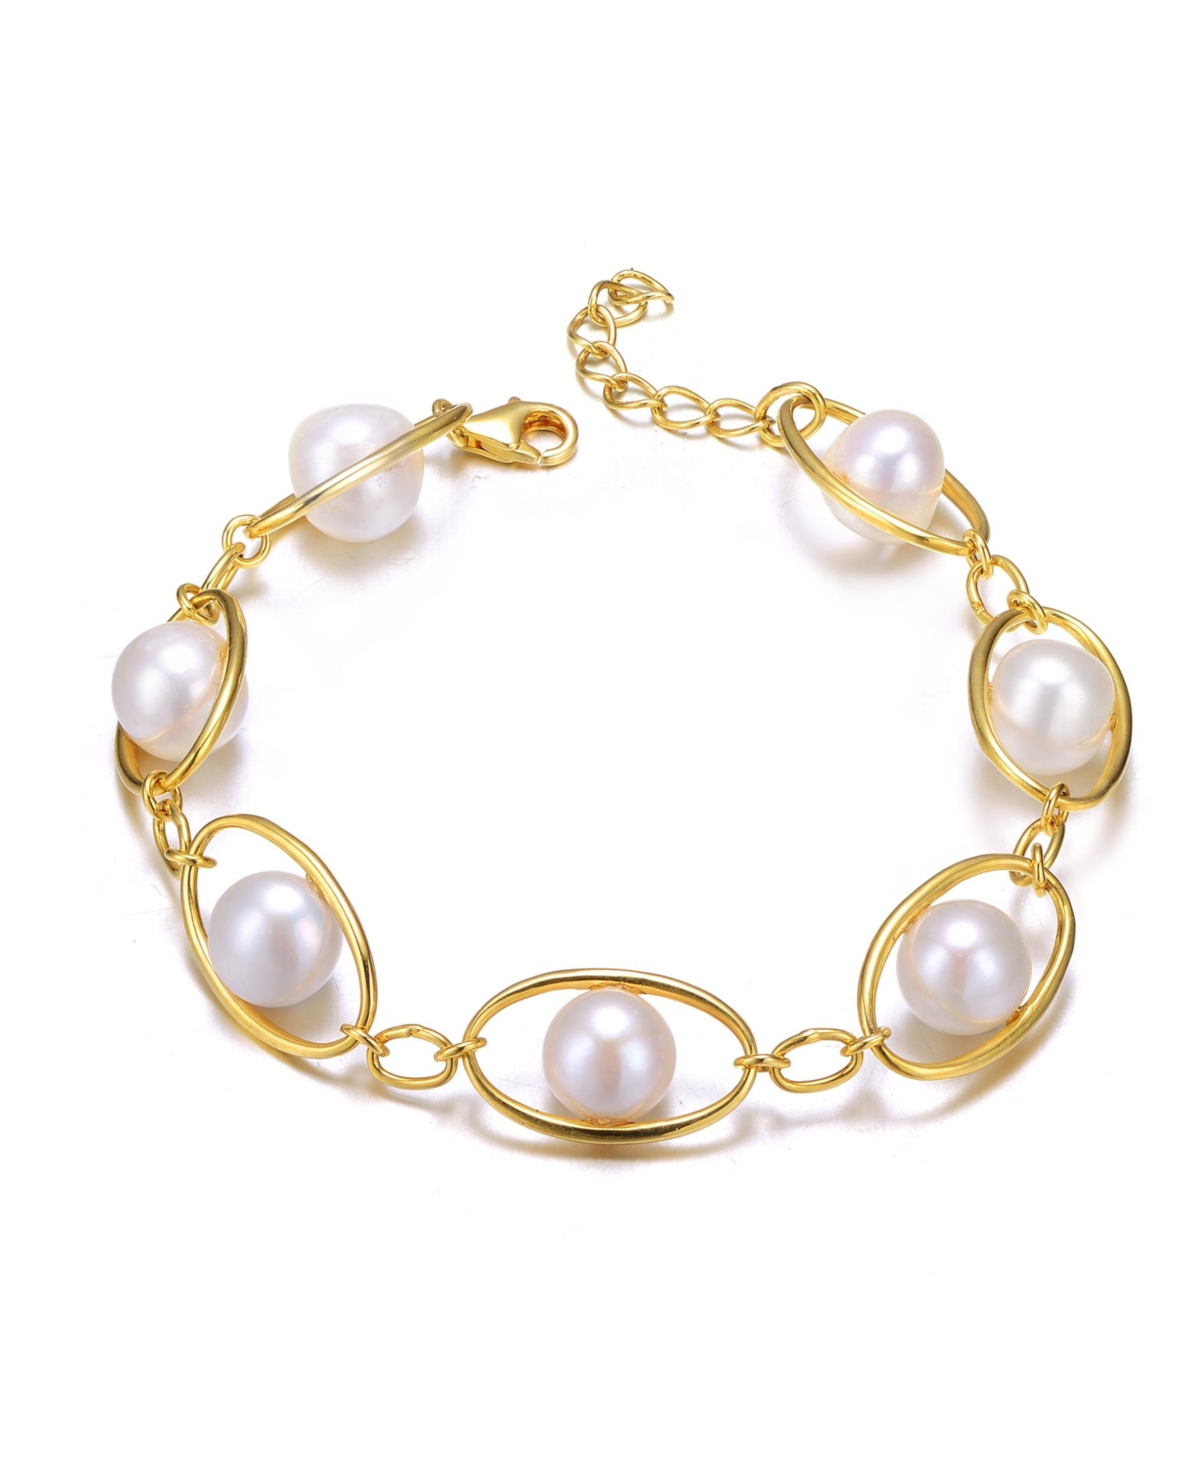 Sterling Silver 14K Gold Plated Genuine Freshwater Pearl and Cubic Zirconia Link Oval Spring Adjustable Bracelet - Gold